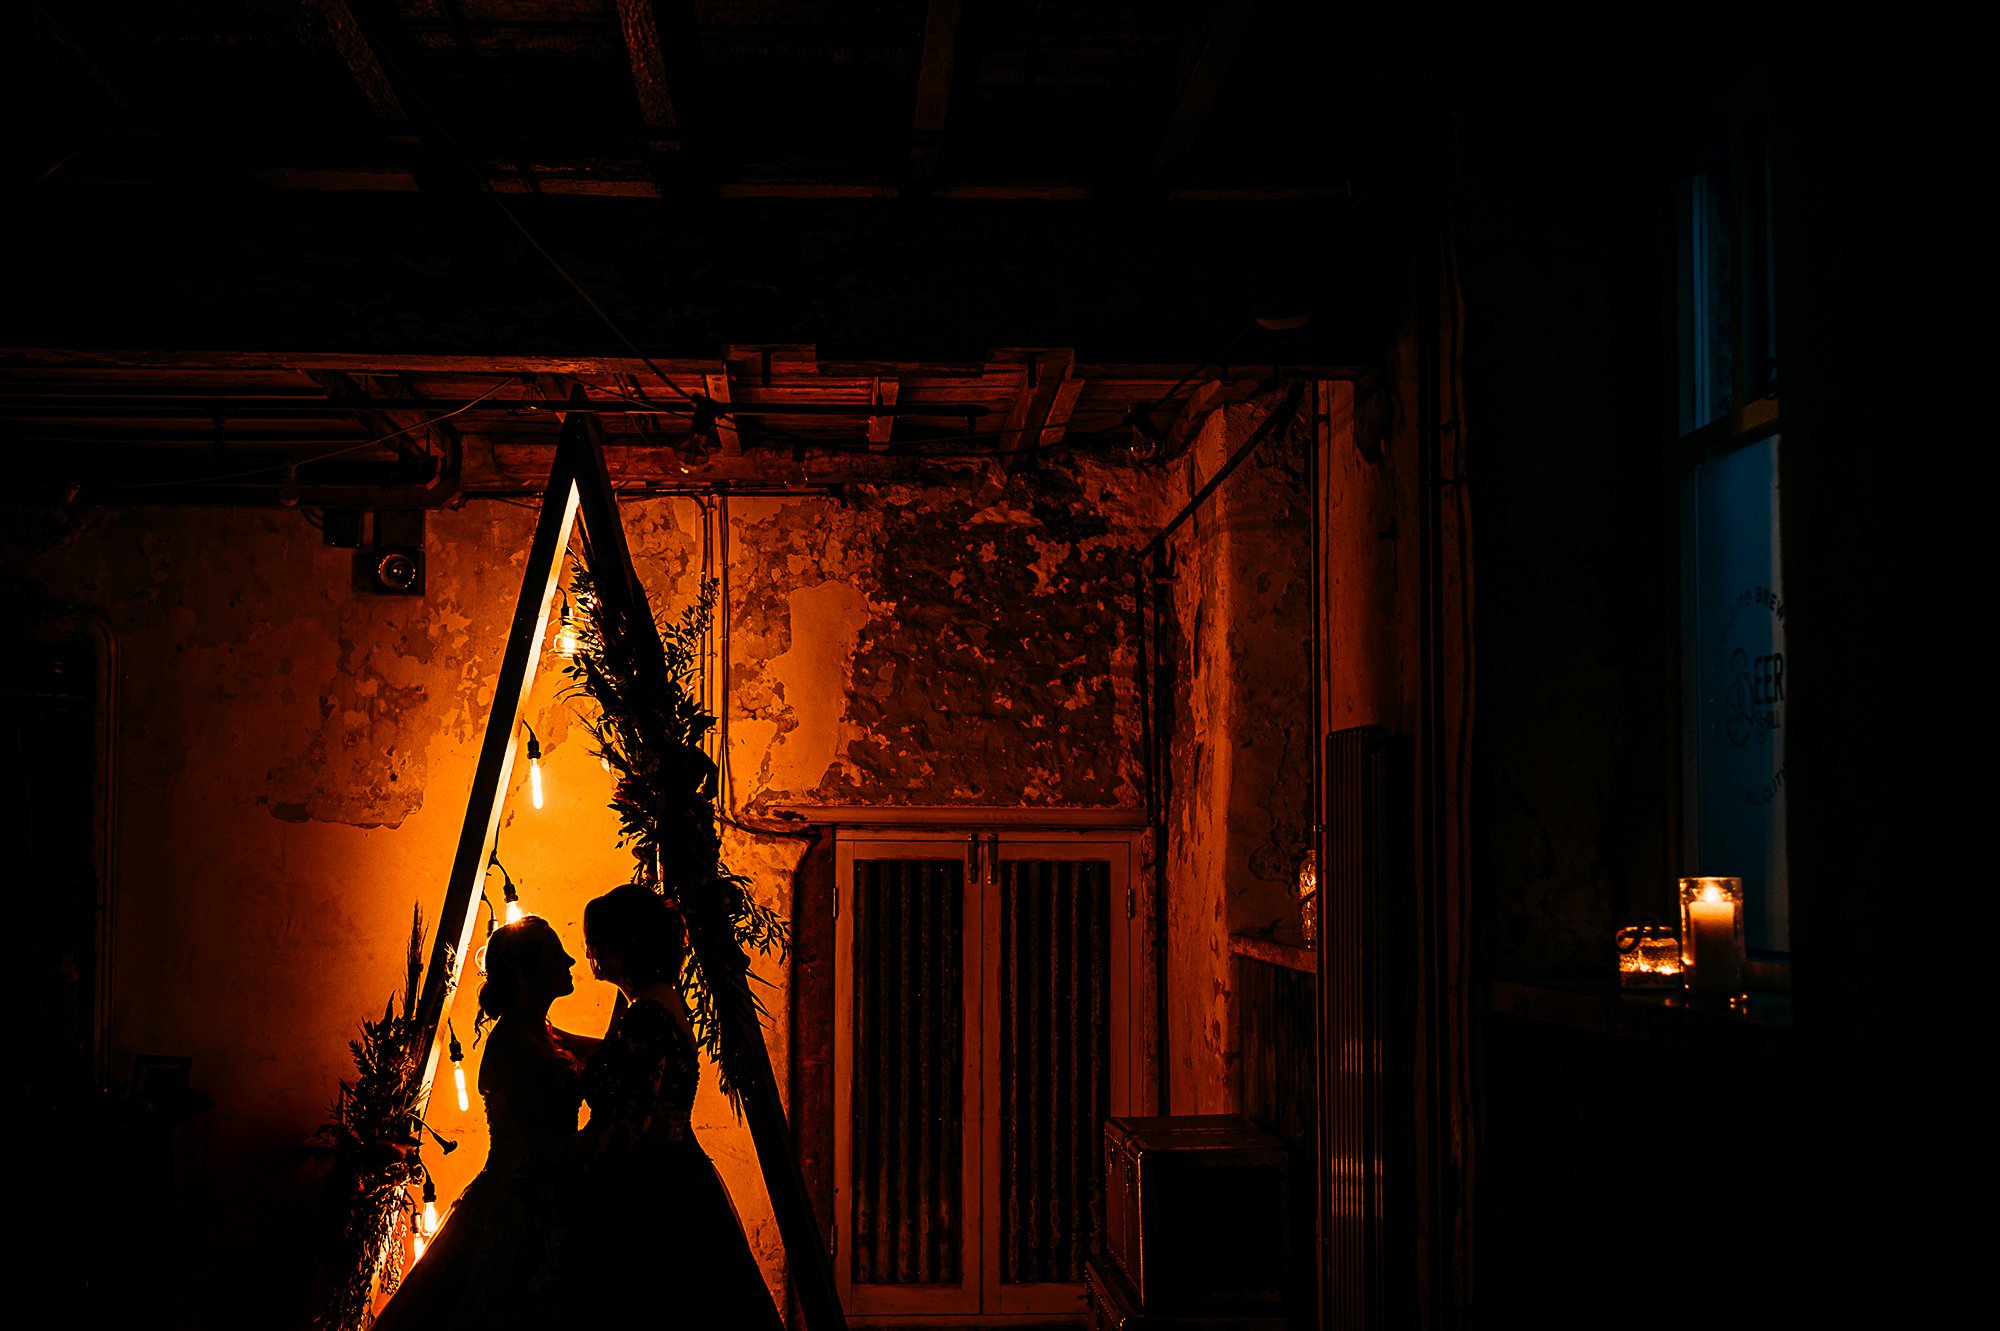  Bride and bride silhouette by an orange light.  